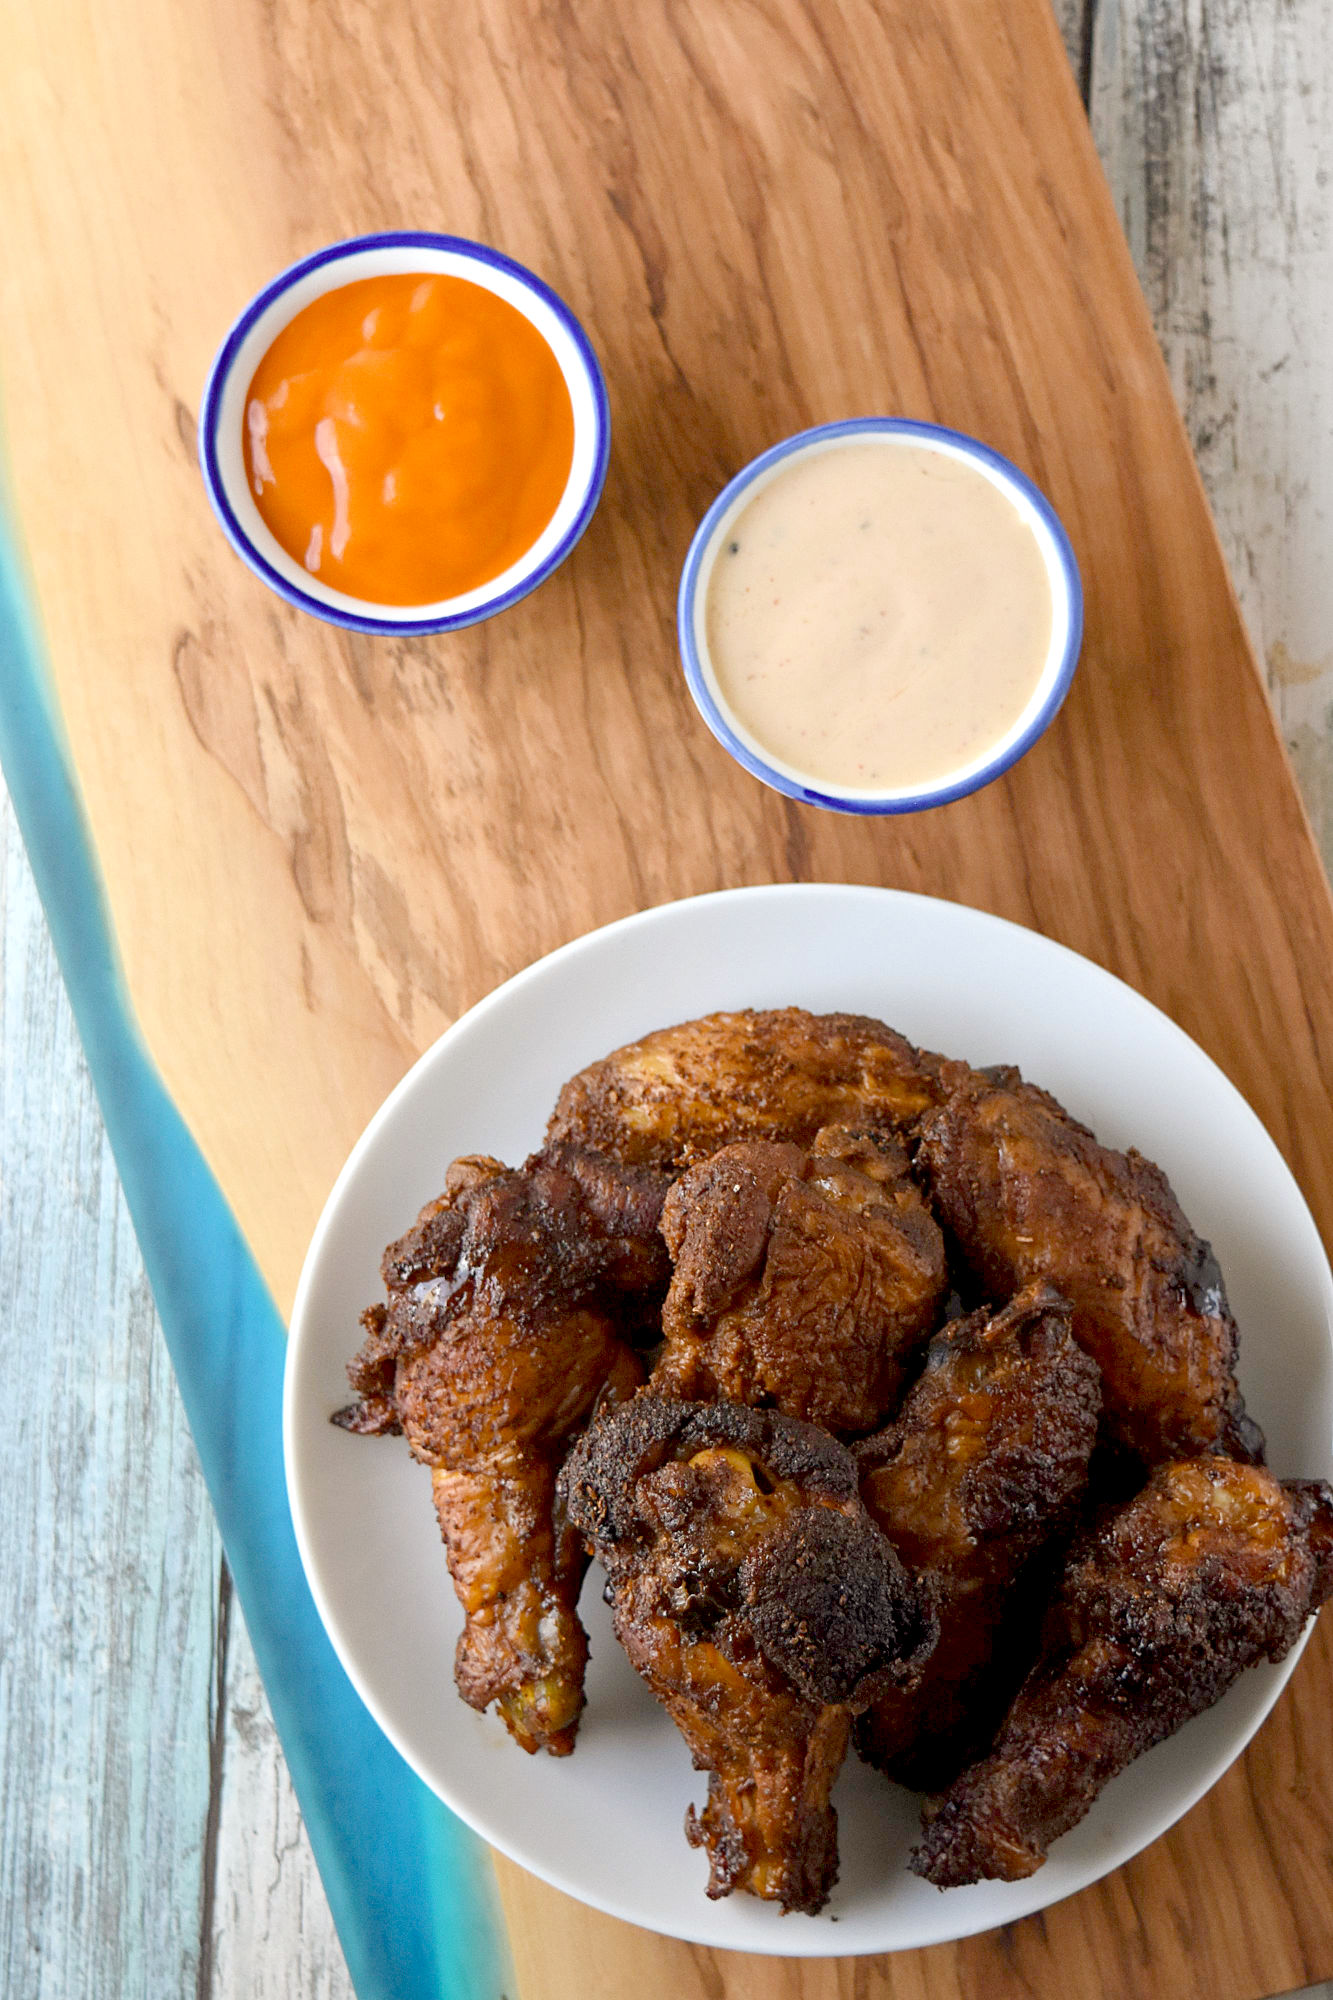 Smoked Old Bay Wings have a light smoky flavor combined with the Old Bay Lemon Garlic flavored seasoning.  They’re a simply delicious way to celebrate Dad on Father’s Day. #OurFamilyTable